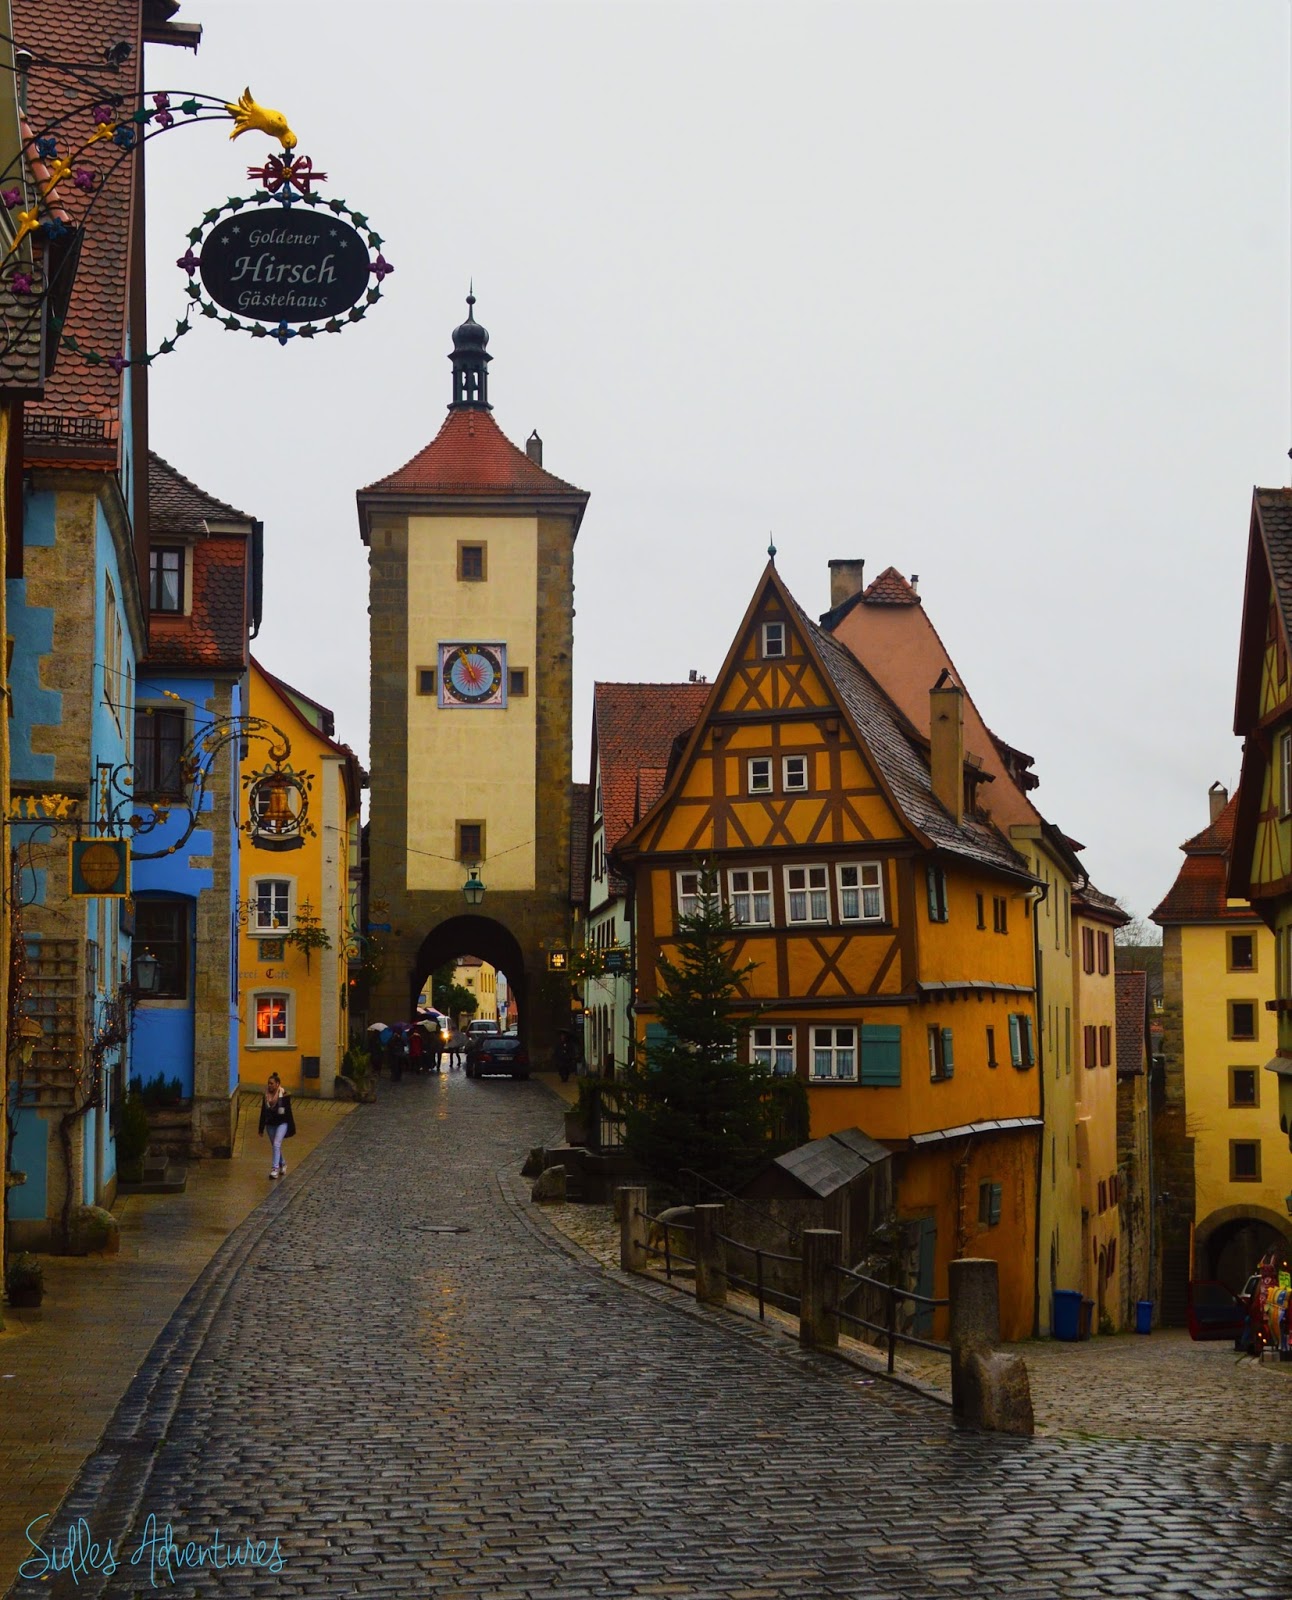 Rothenburg o.d. Tauber, Germany | Sidles' Adventures